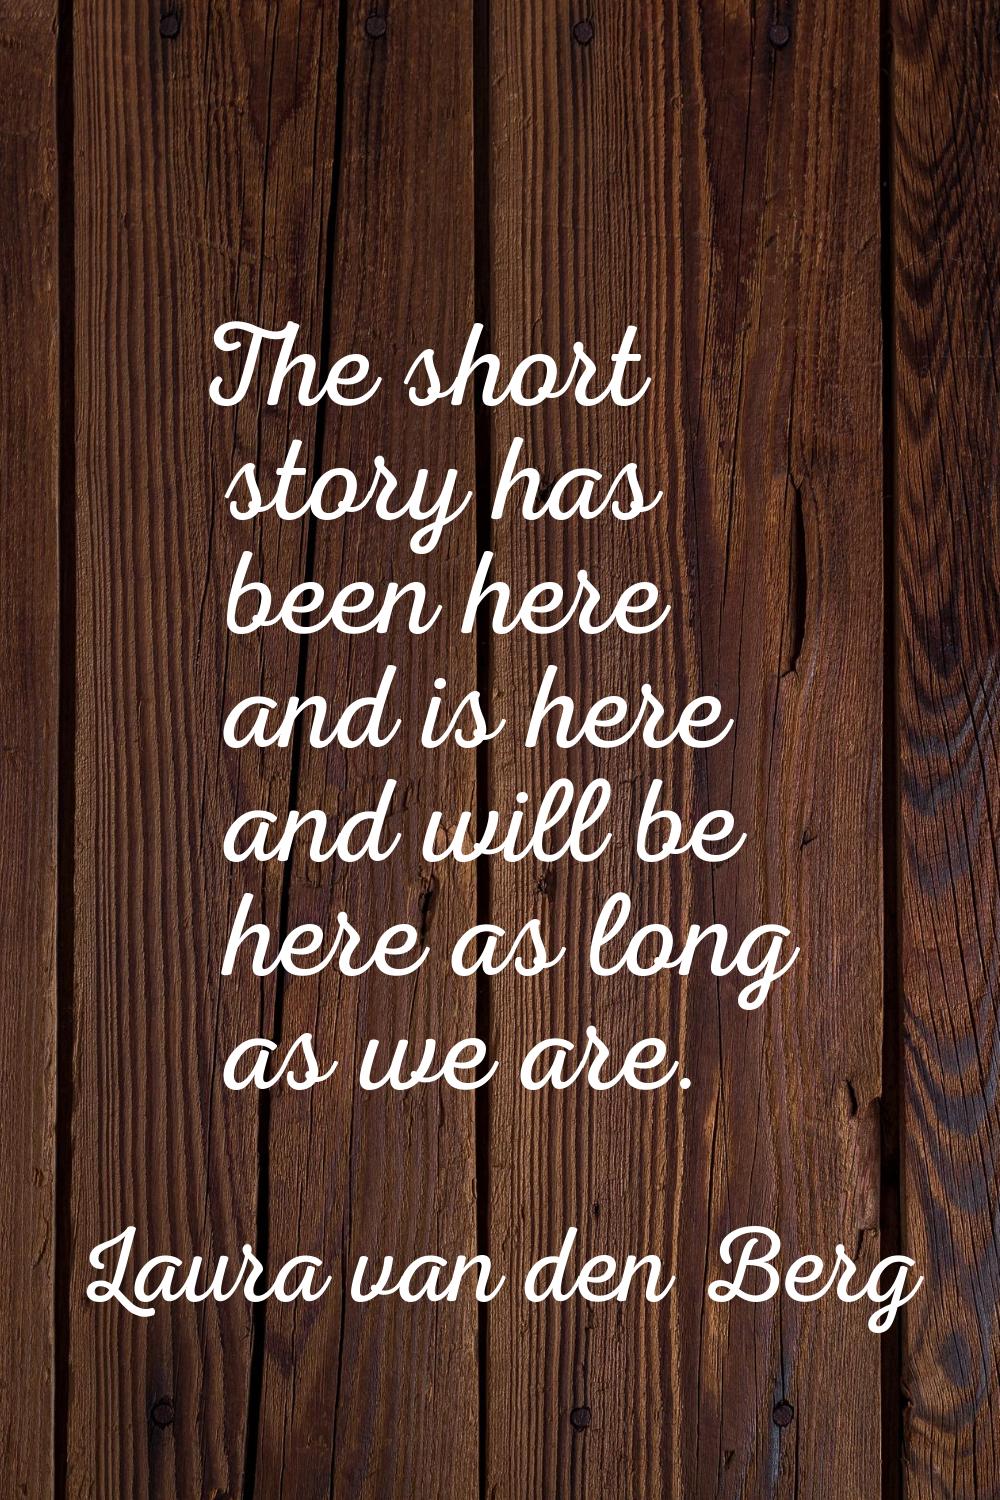 The short story has been here and is here and will be here as long as we are.